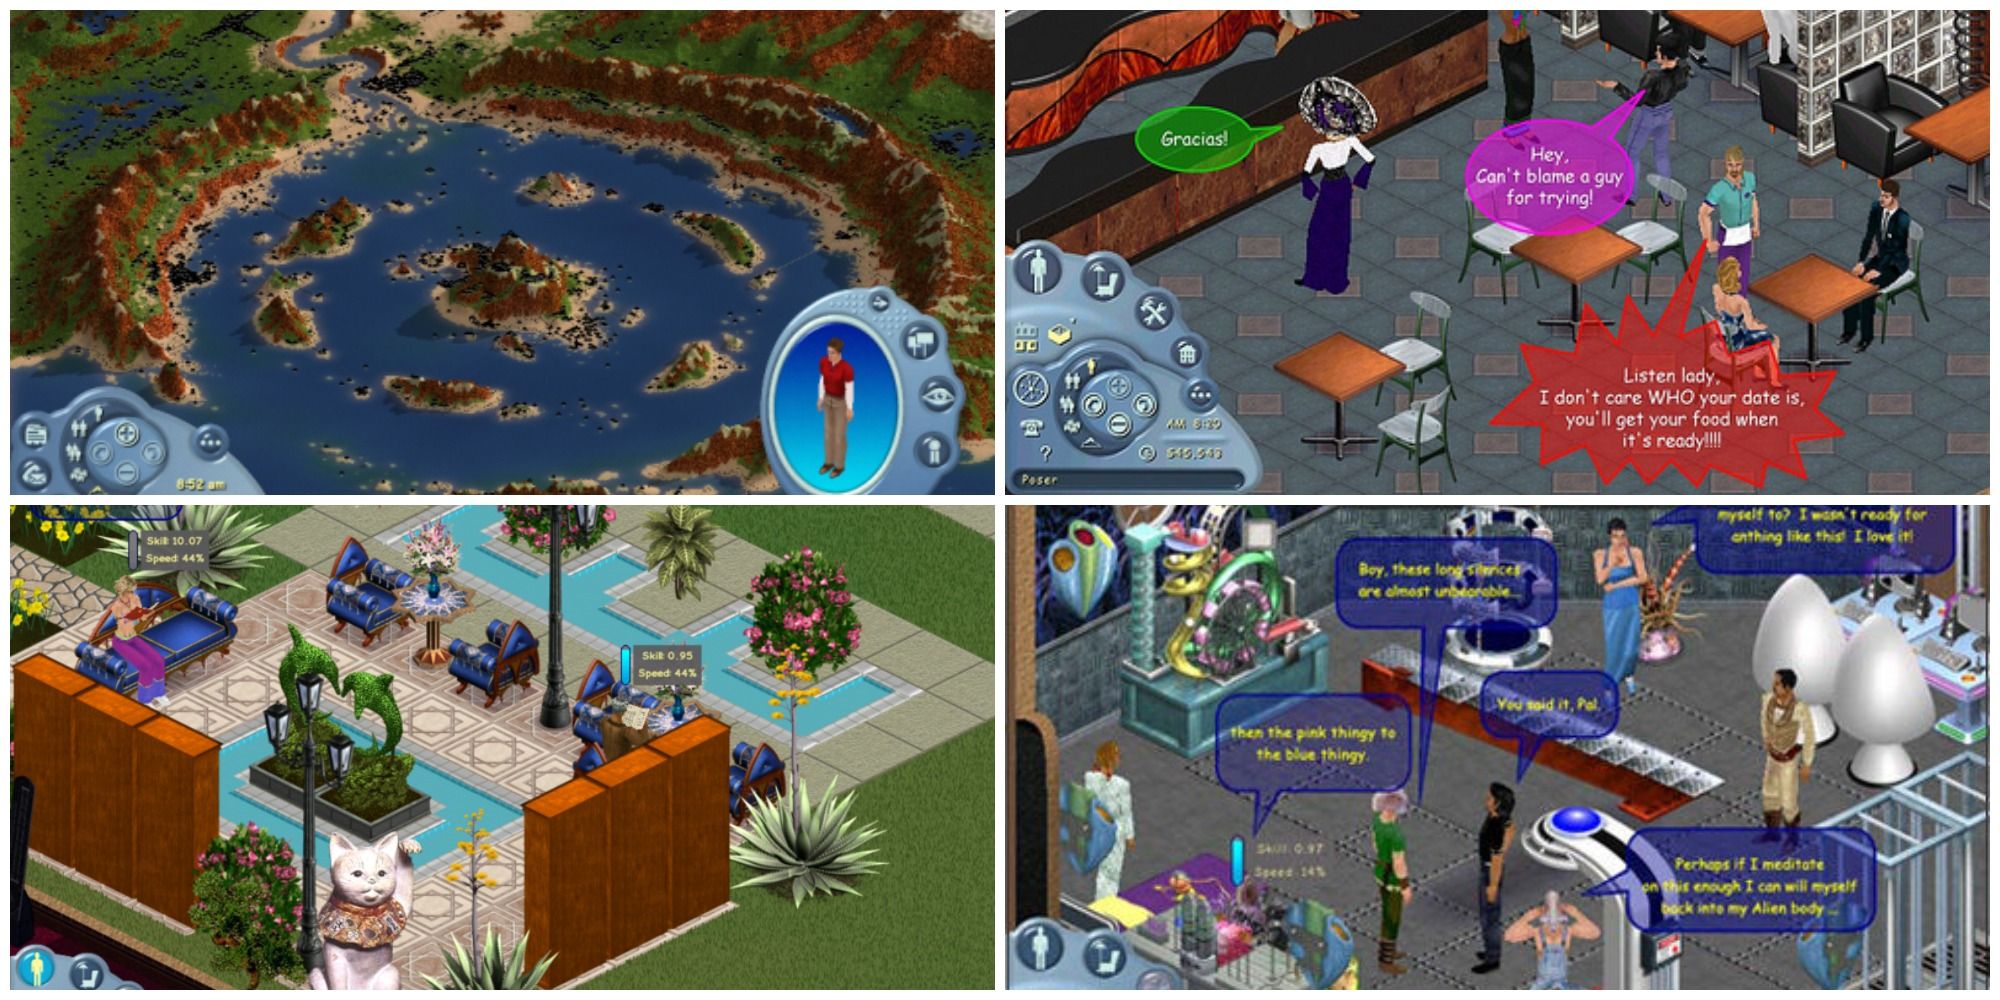 Ranking The Sims Games From Best To Strange